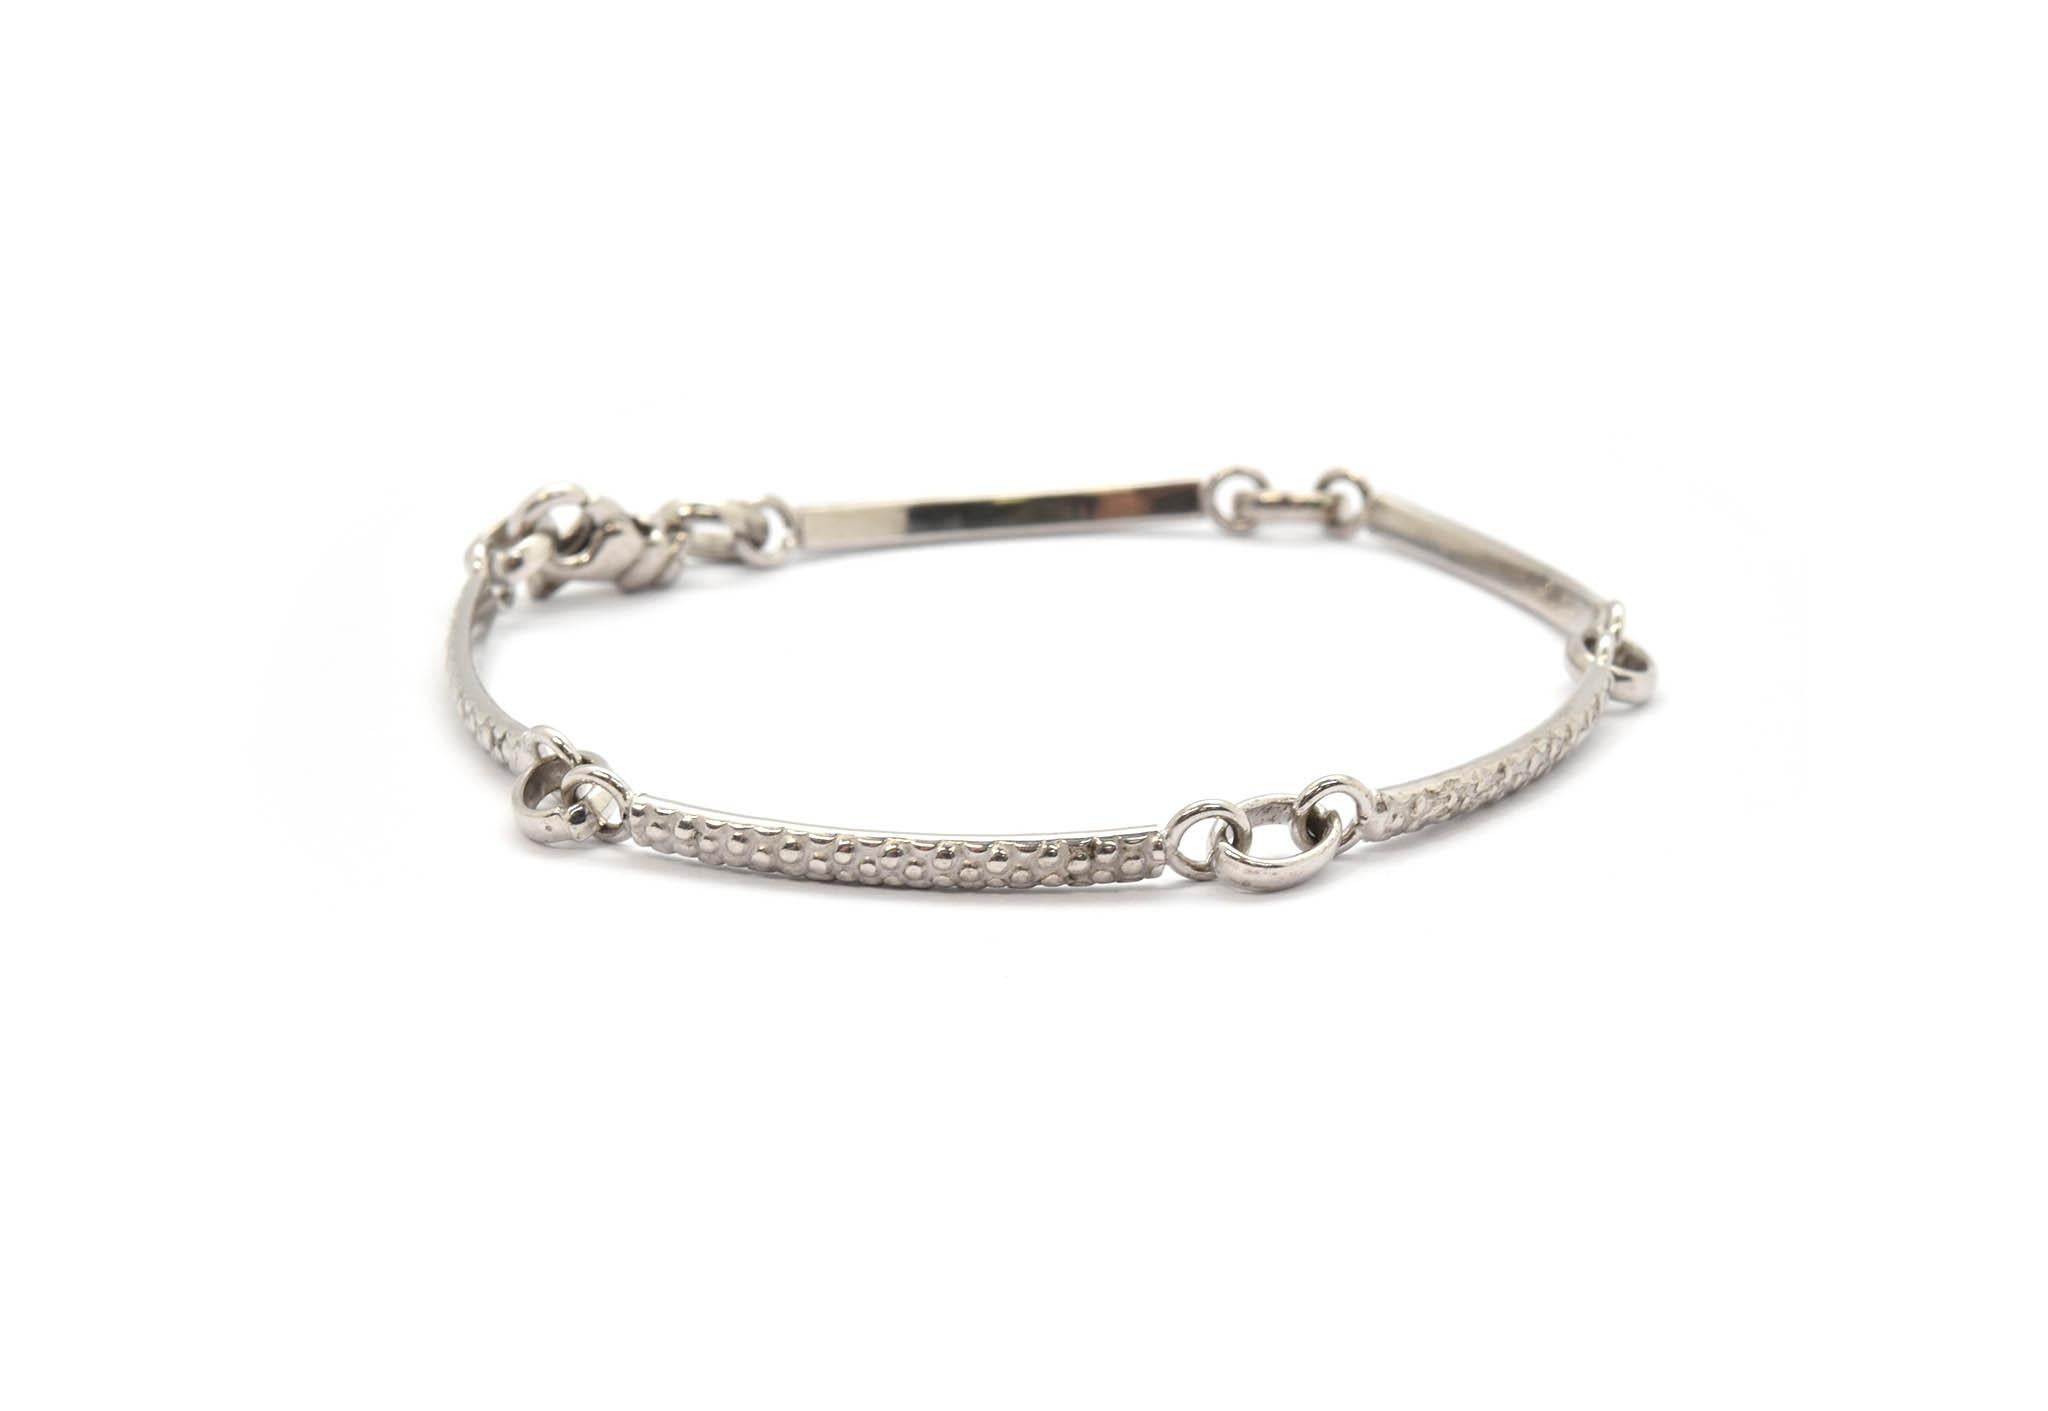 This bracelet is crafted in 18k white gold. It is made of textured links that measure 34mm in length. The bracelet measures 4.5mm at its widest point, and it will fit up to an 8-inch wrist. The bracelet weighs 7.38 grams.